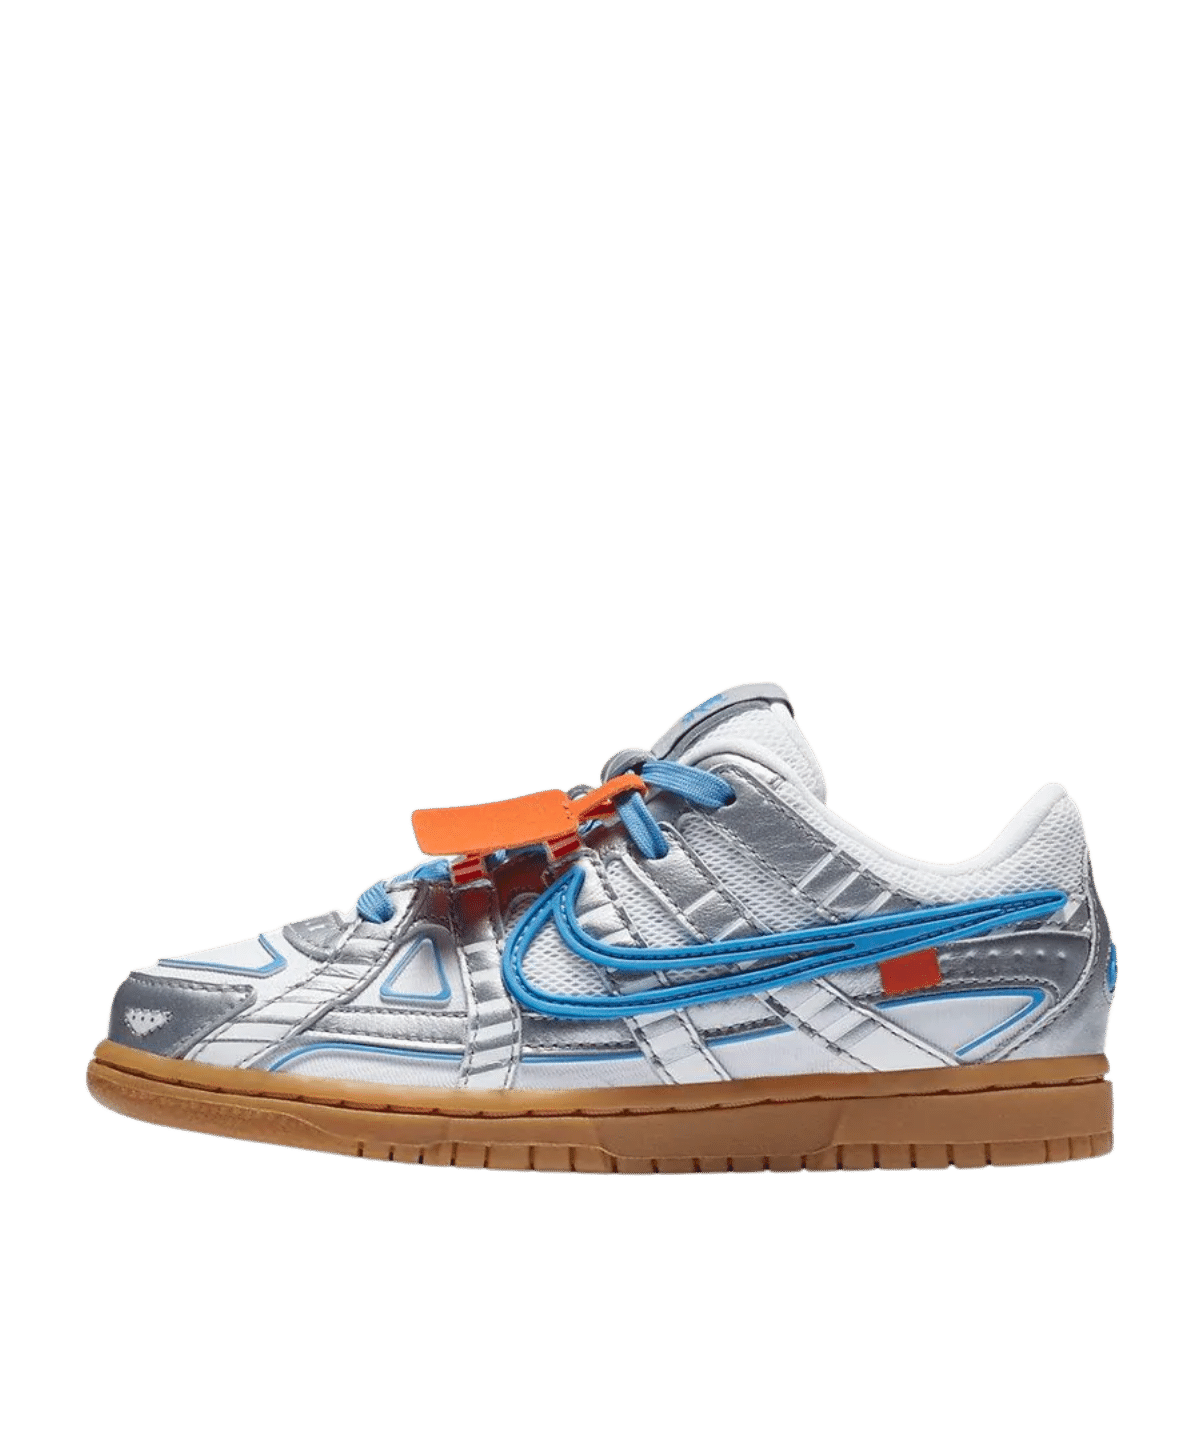 Nike Air Rubber Dunk x Off-White Kids 'University Blue' side view